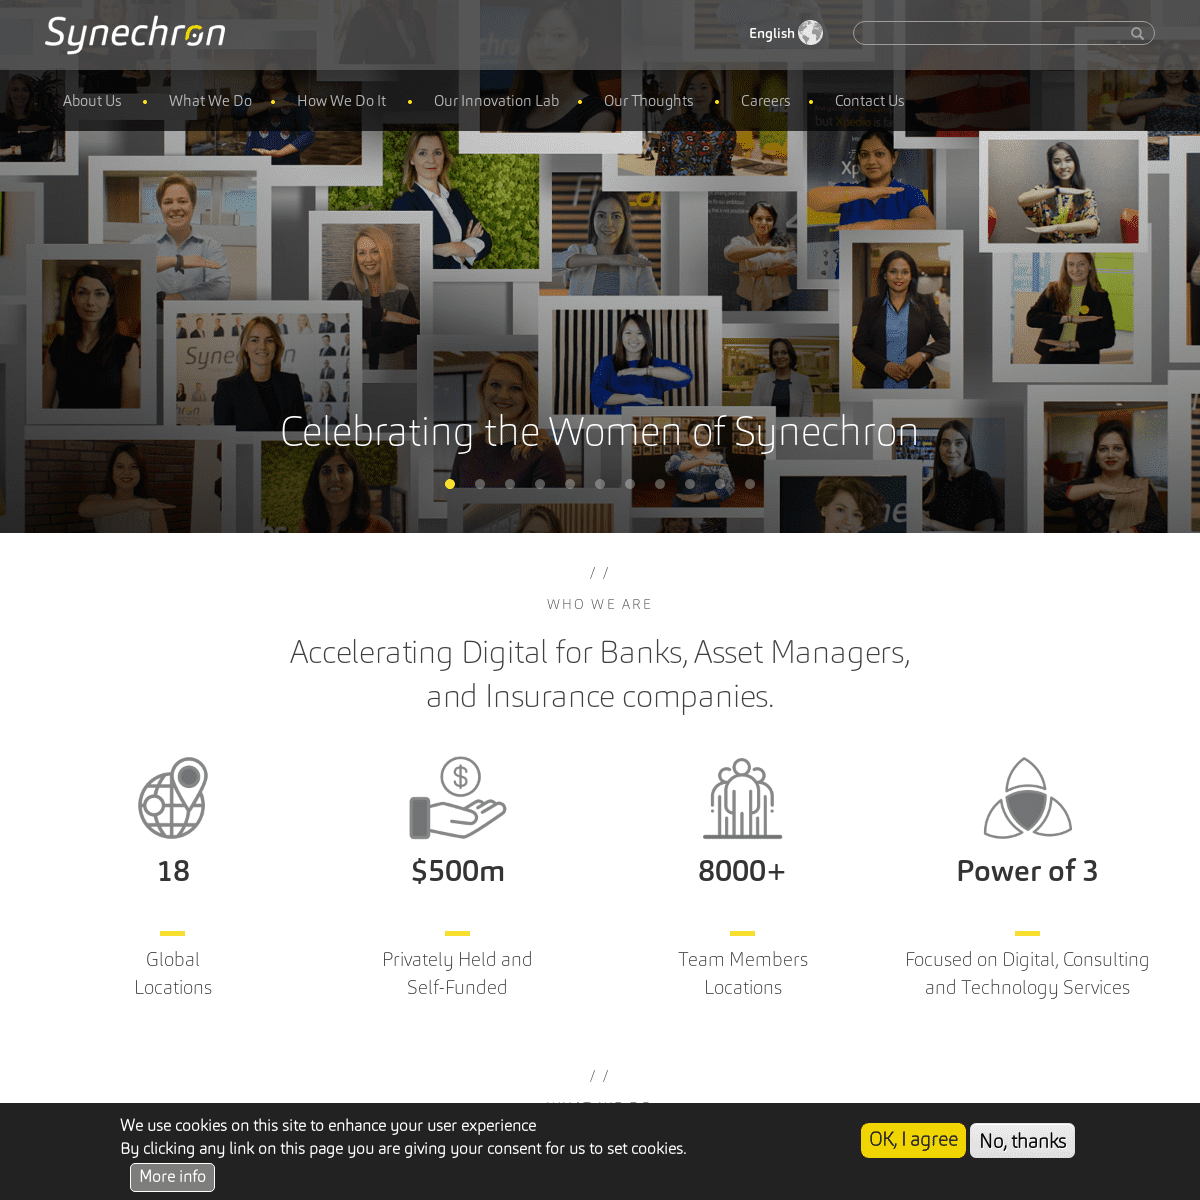 A complete backup of synechron.com